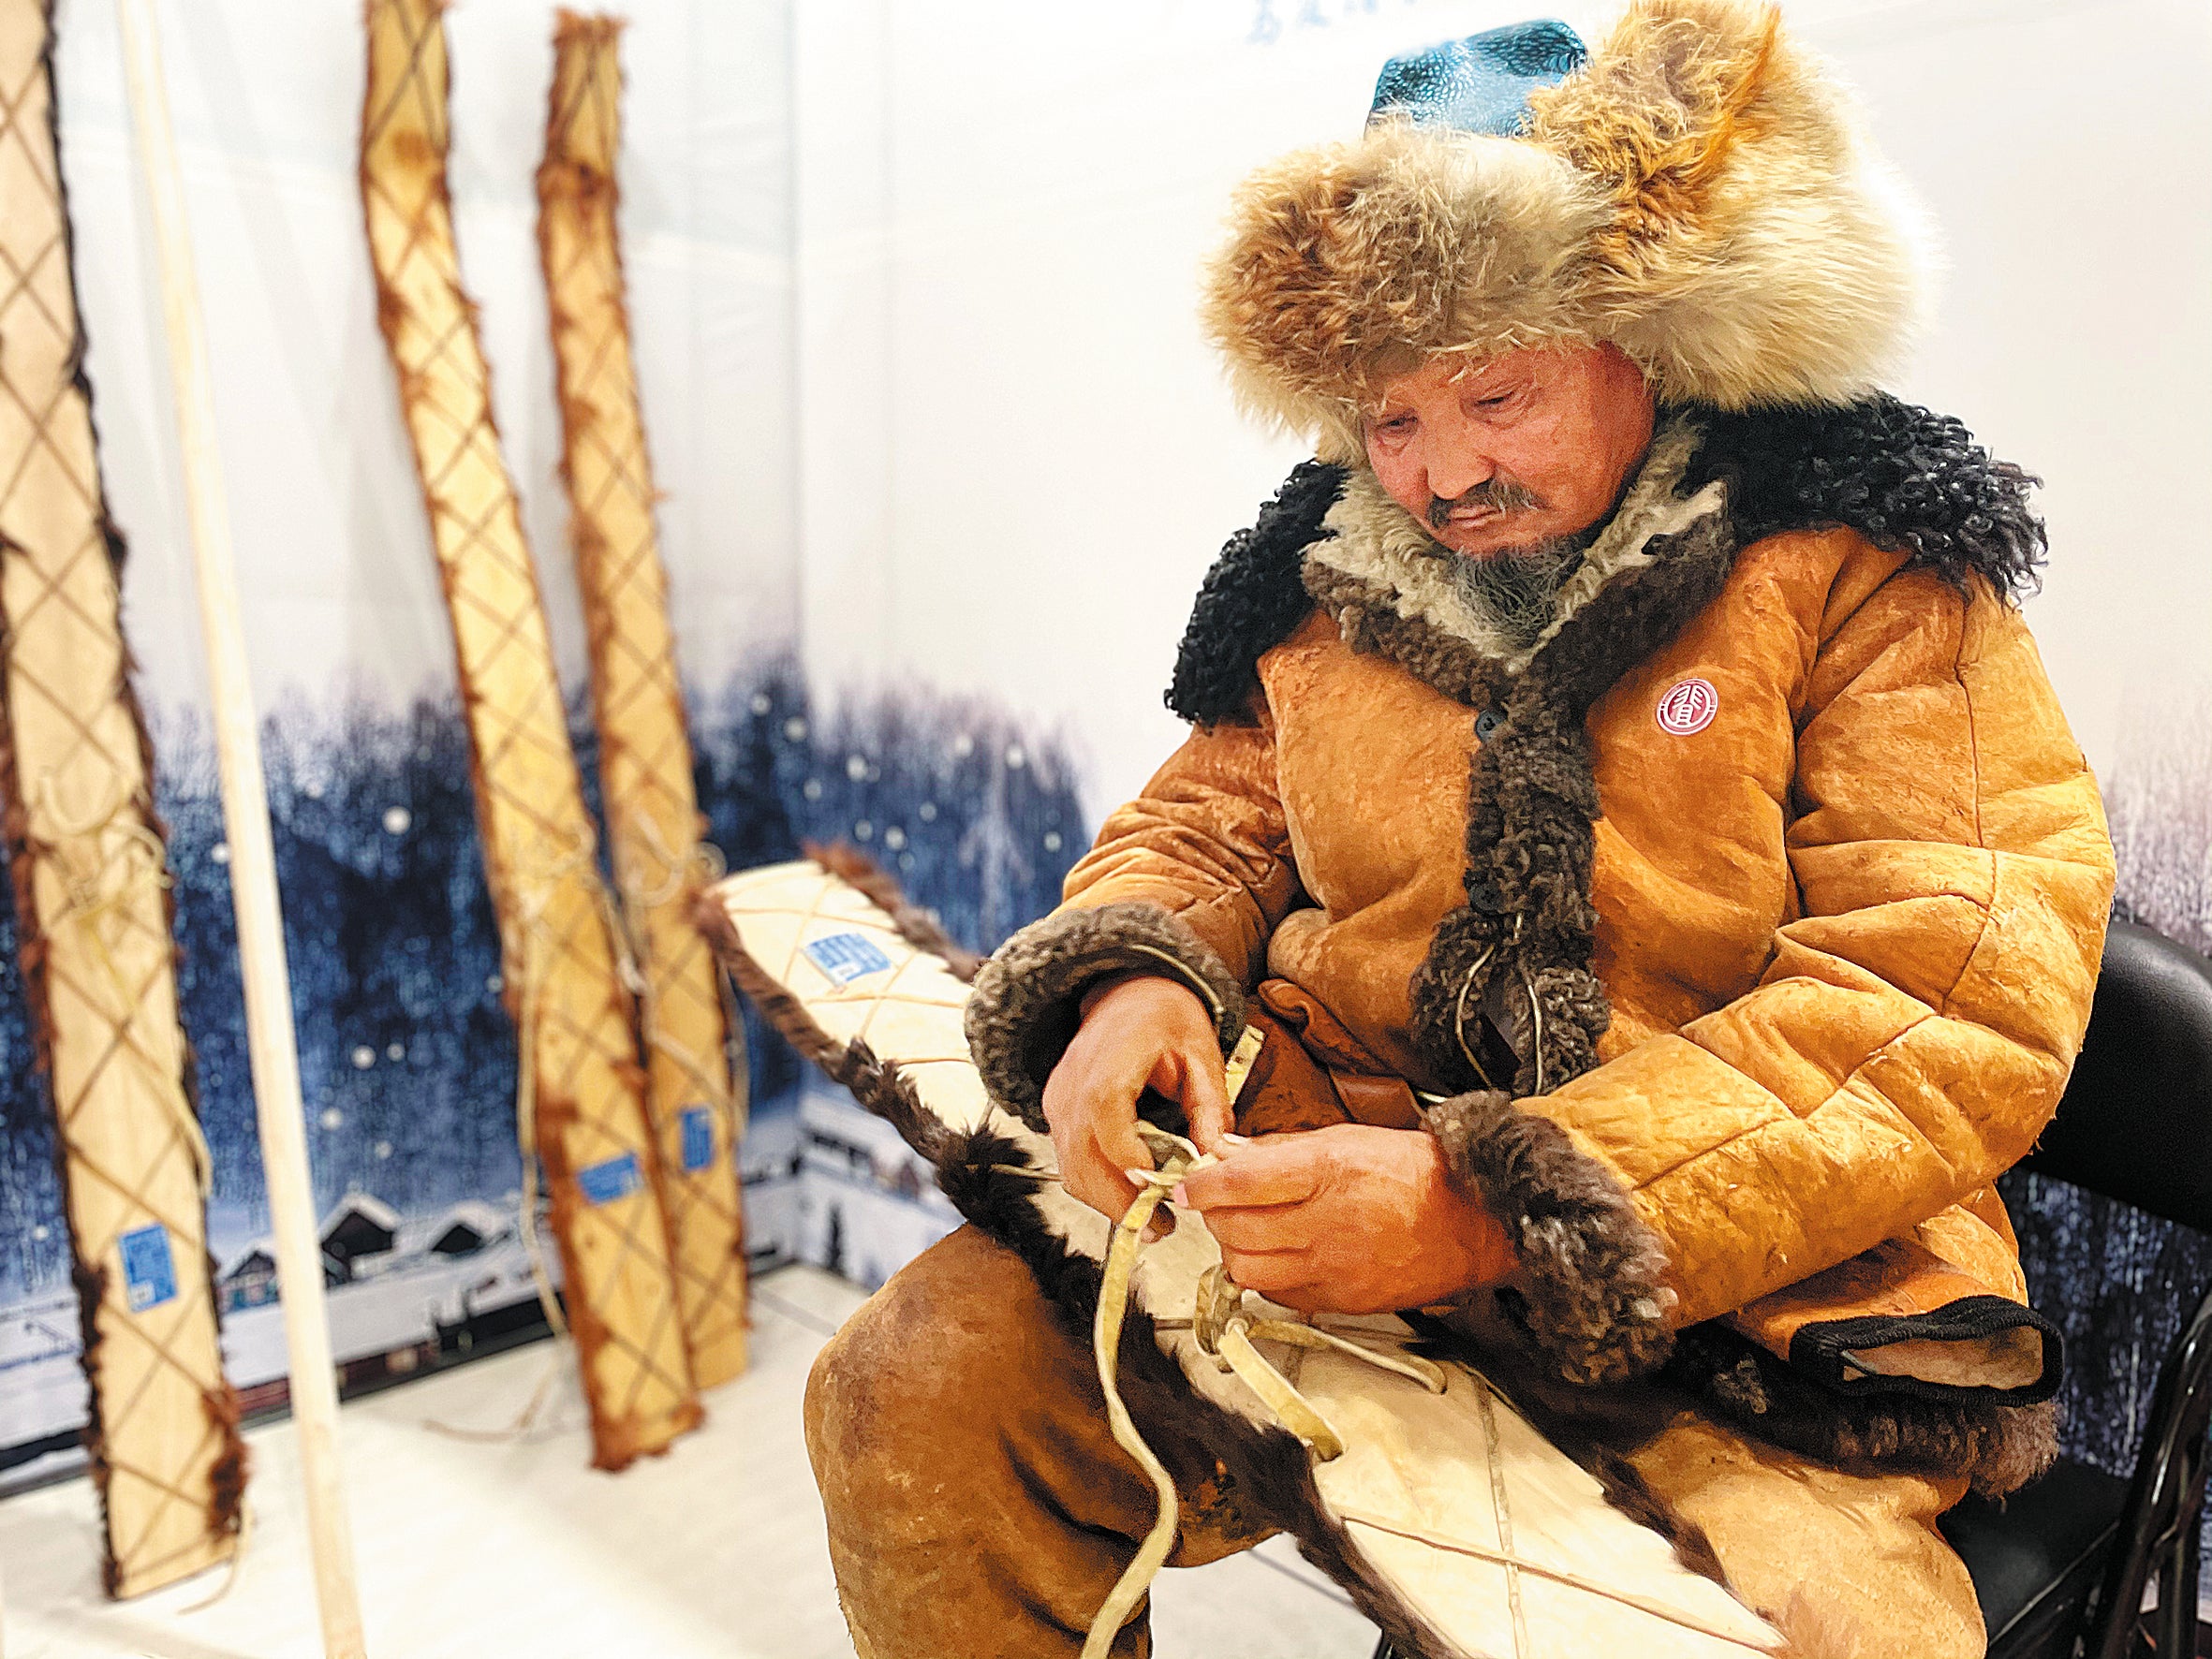 Silambek Sakish showcases fur skis he has made at an intangible cultural heritage exhibition held in Urumqi, Xinjiang, in October